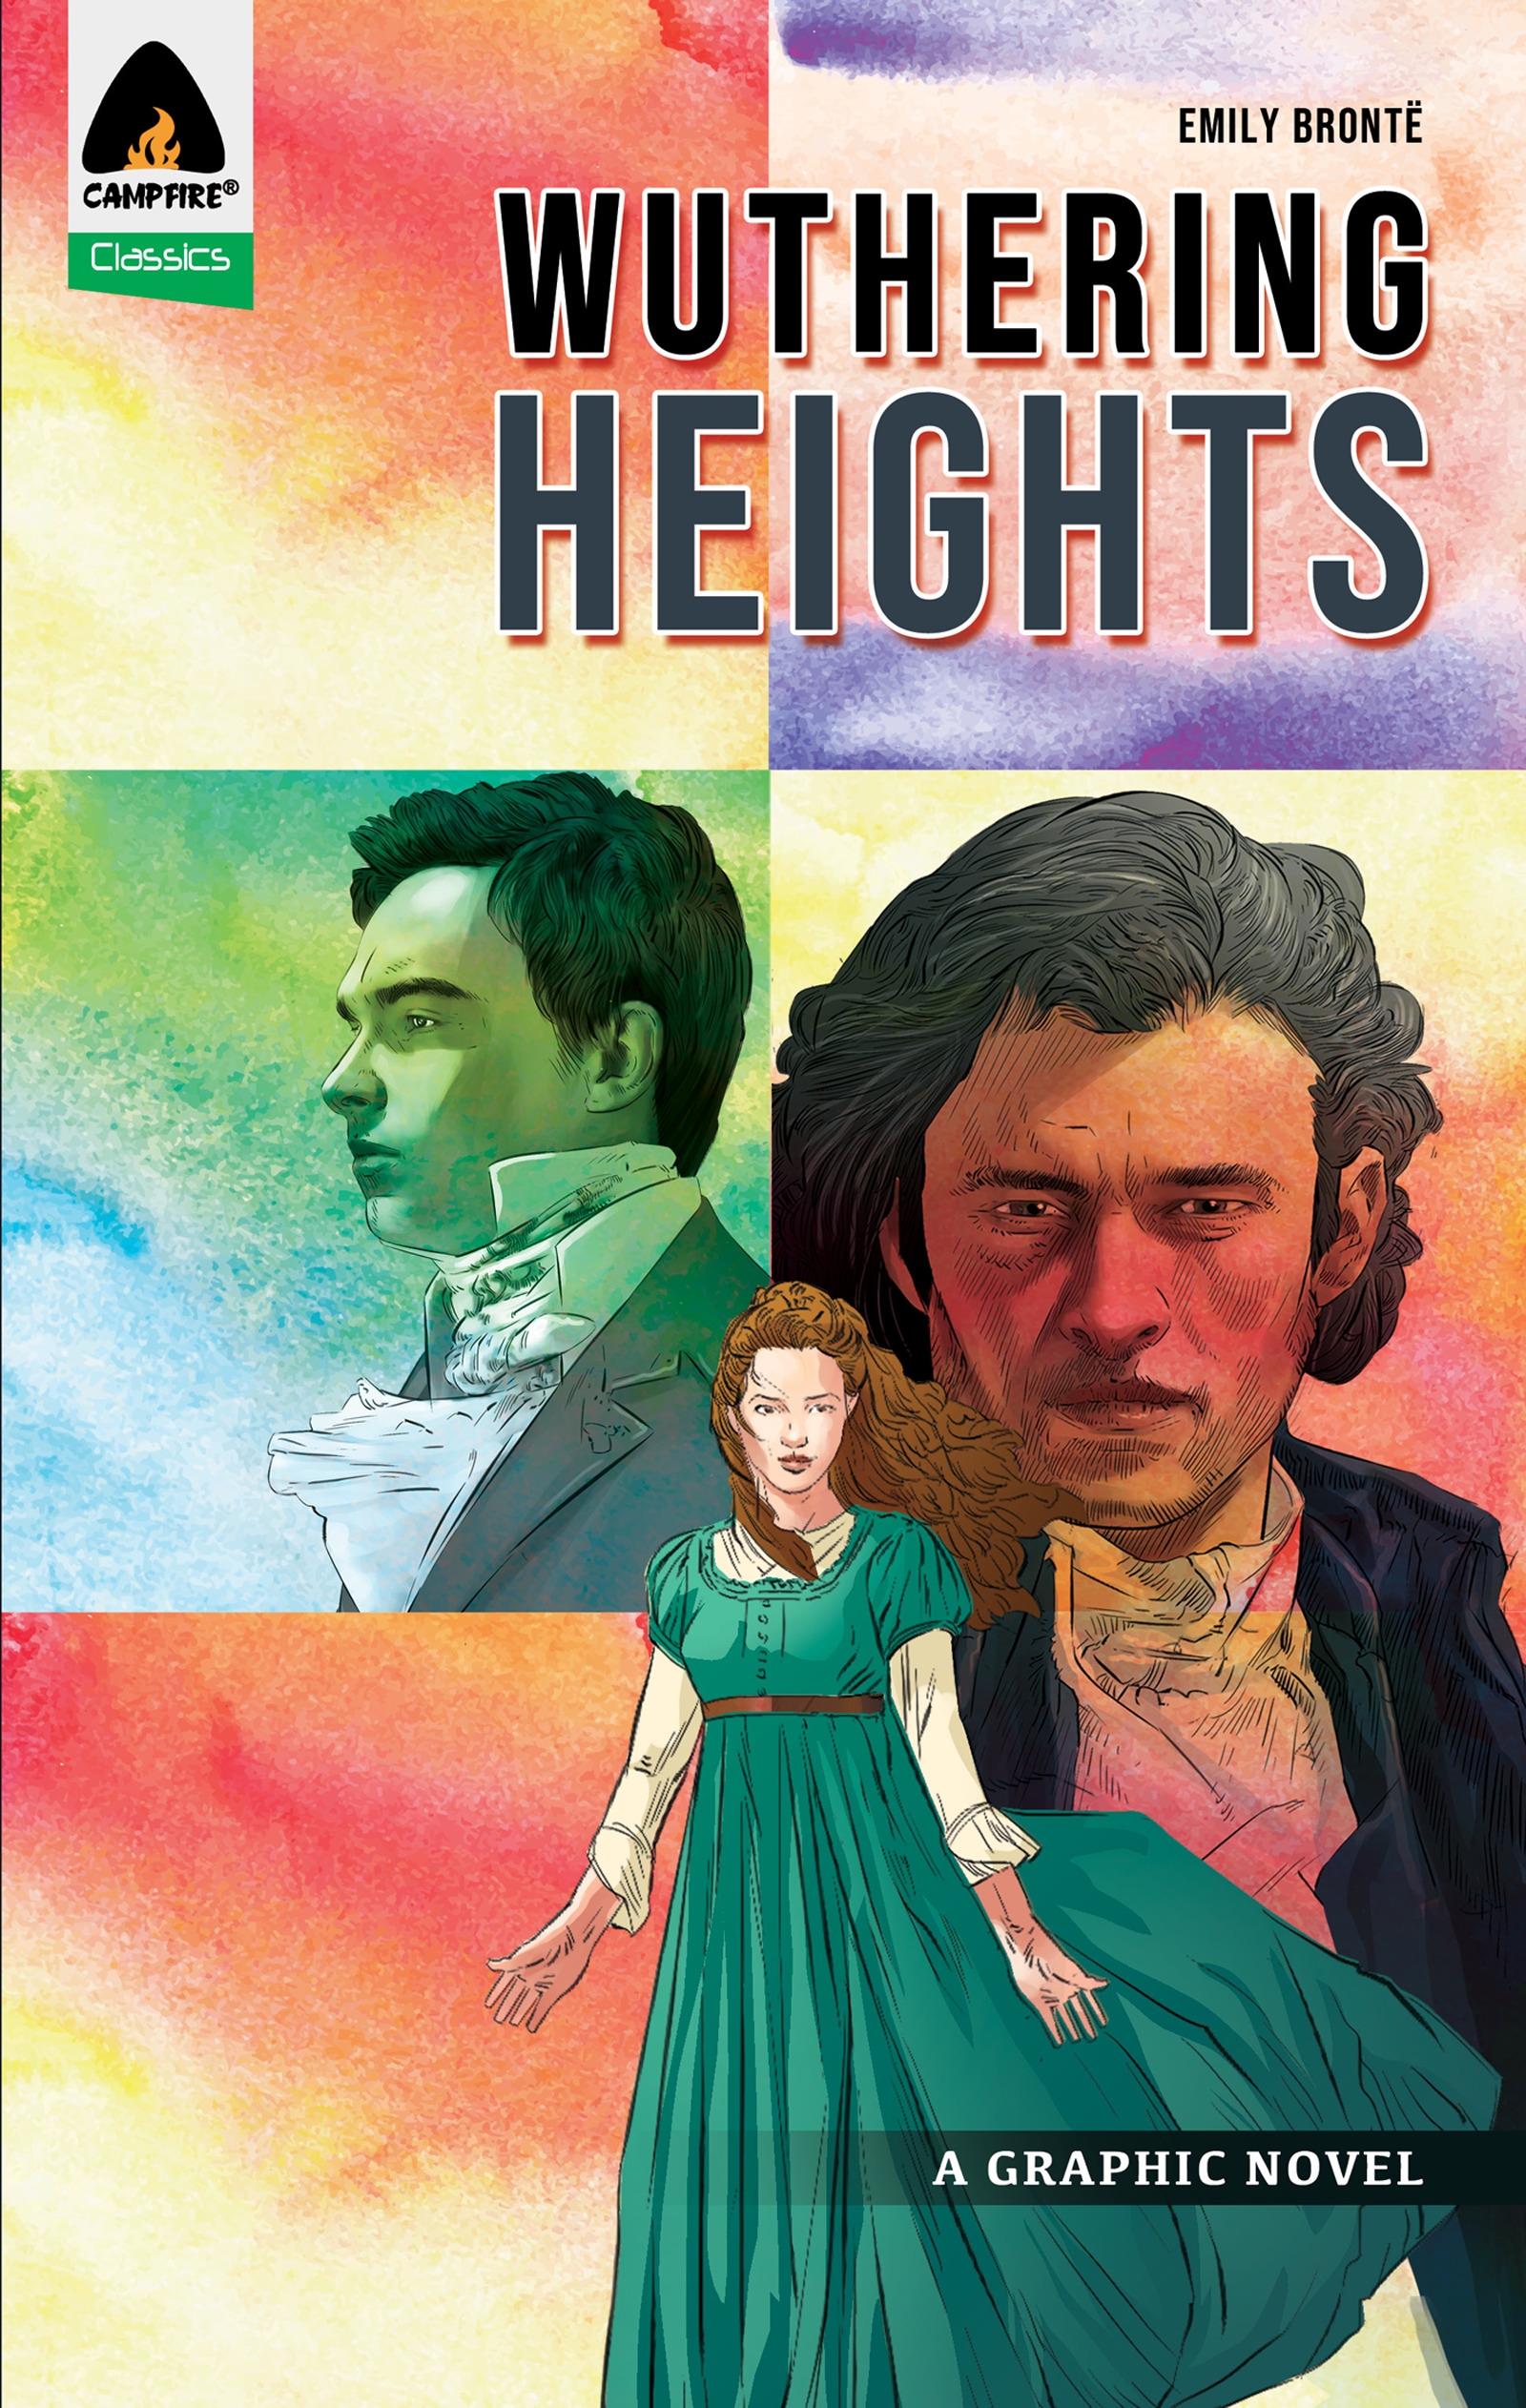 Wuthering Heights by Emily Brontë: 9781435171503 - Union Square & Co.